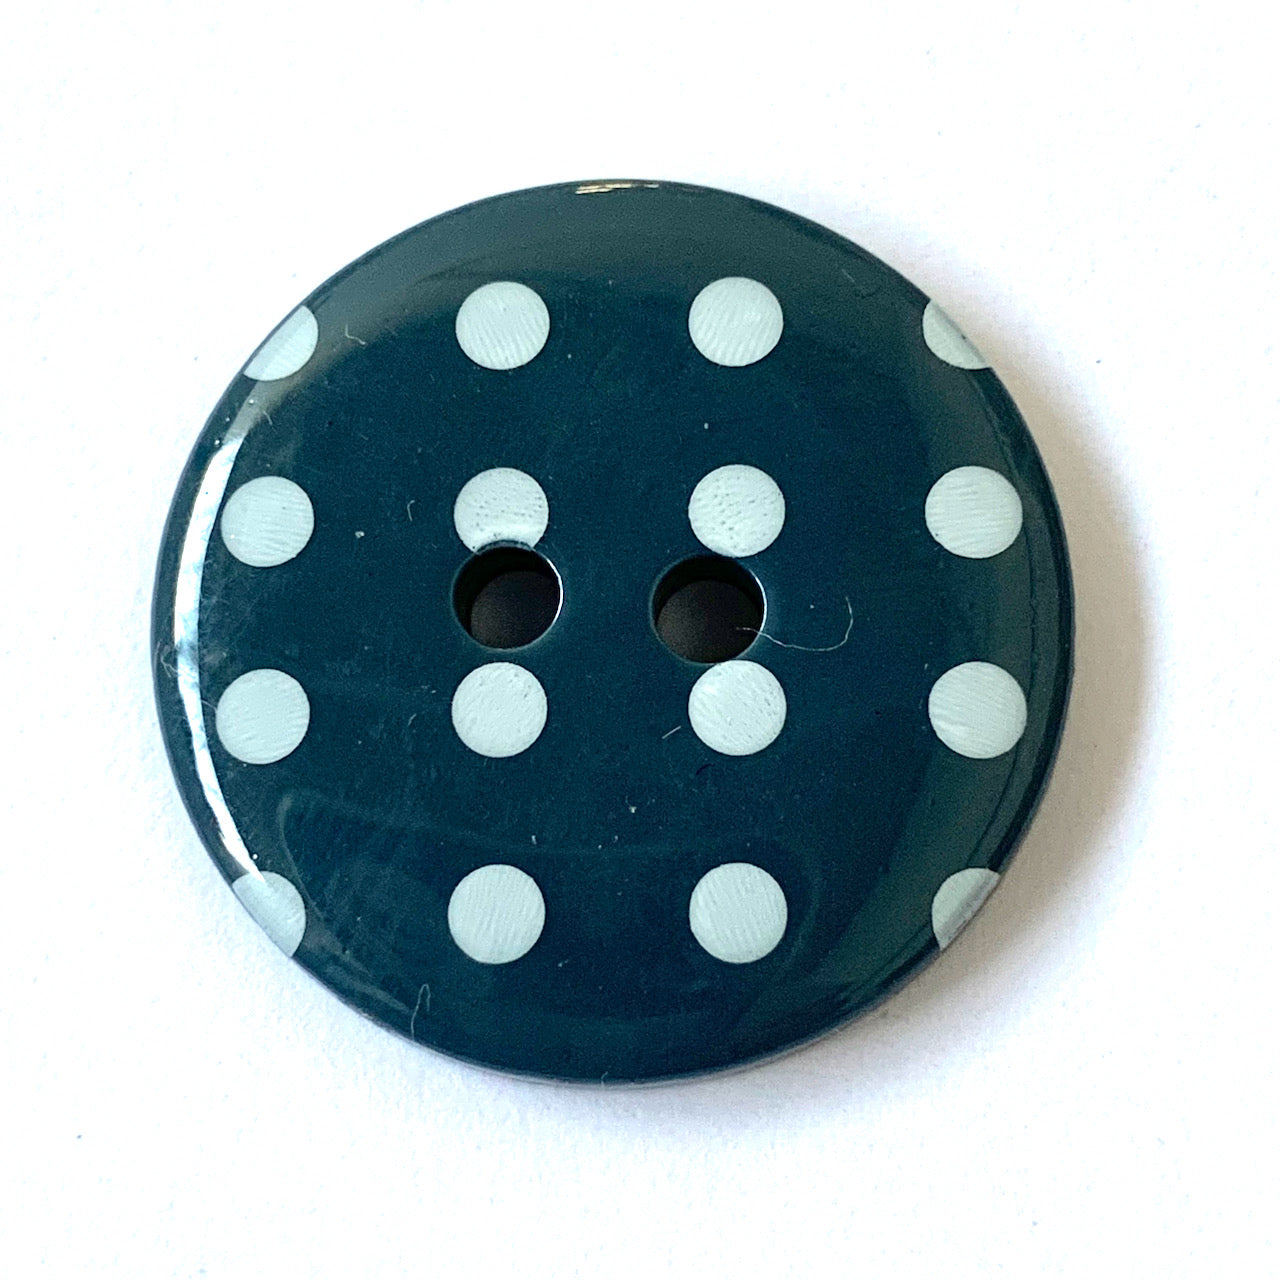 15mm Fine Style Polka Dot Buttons